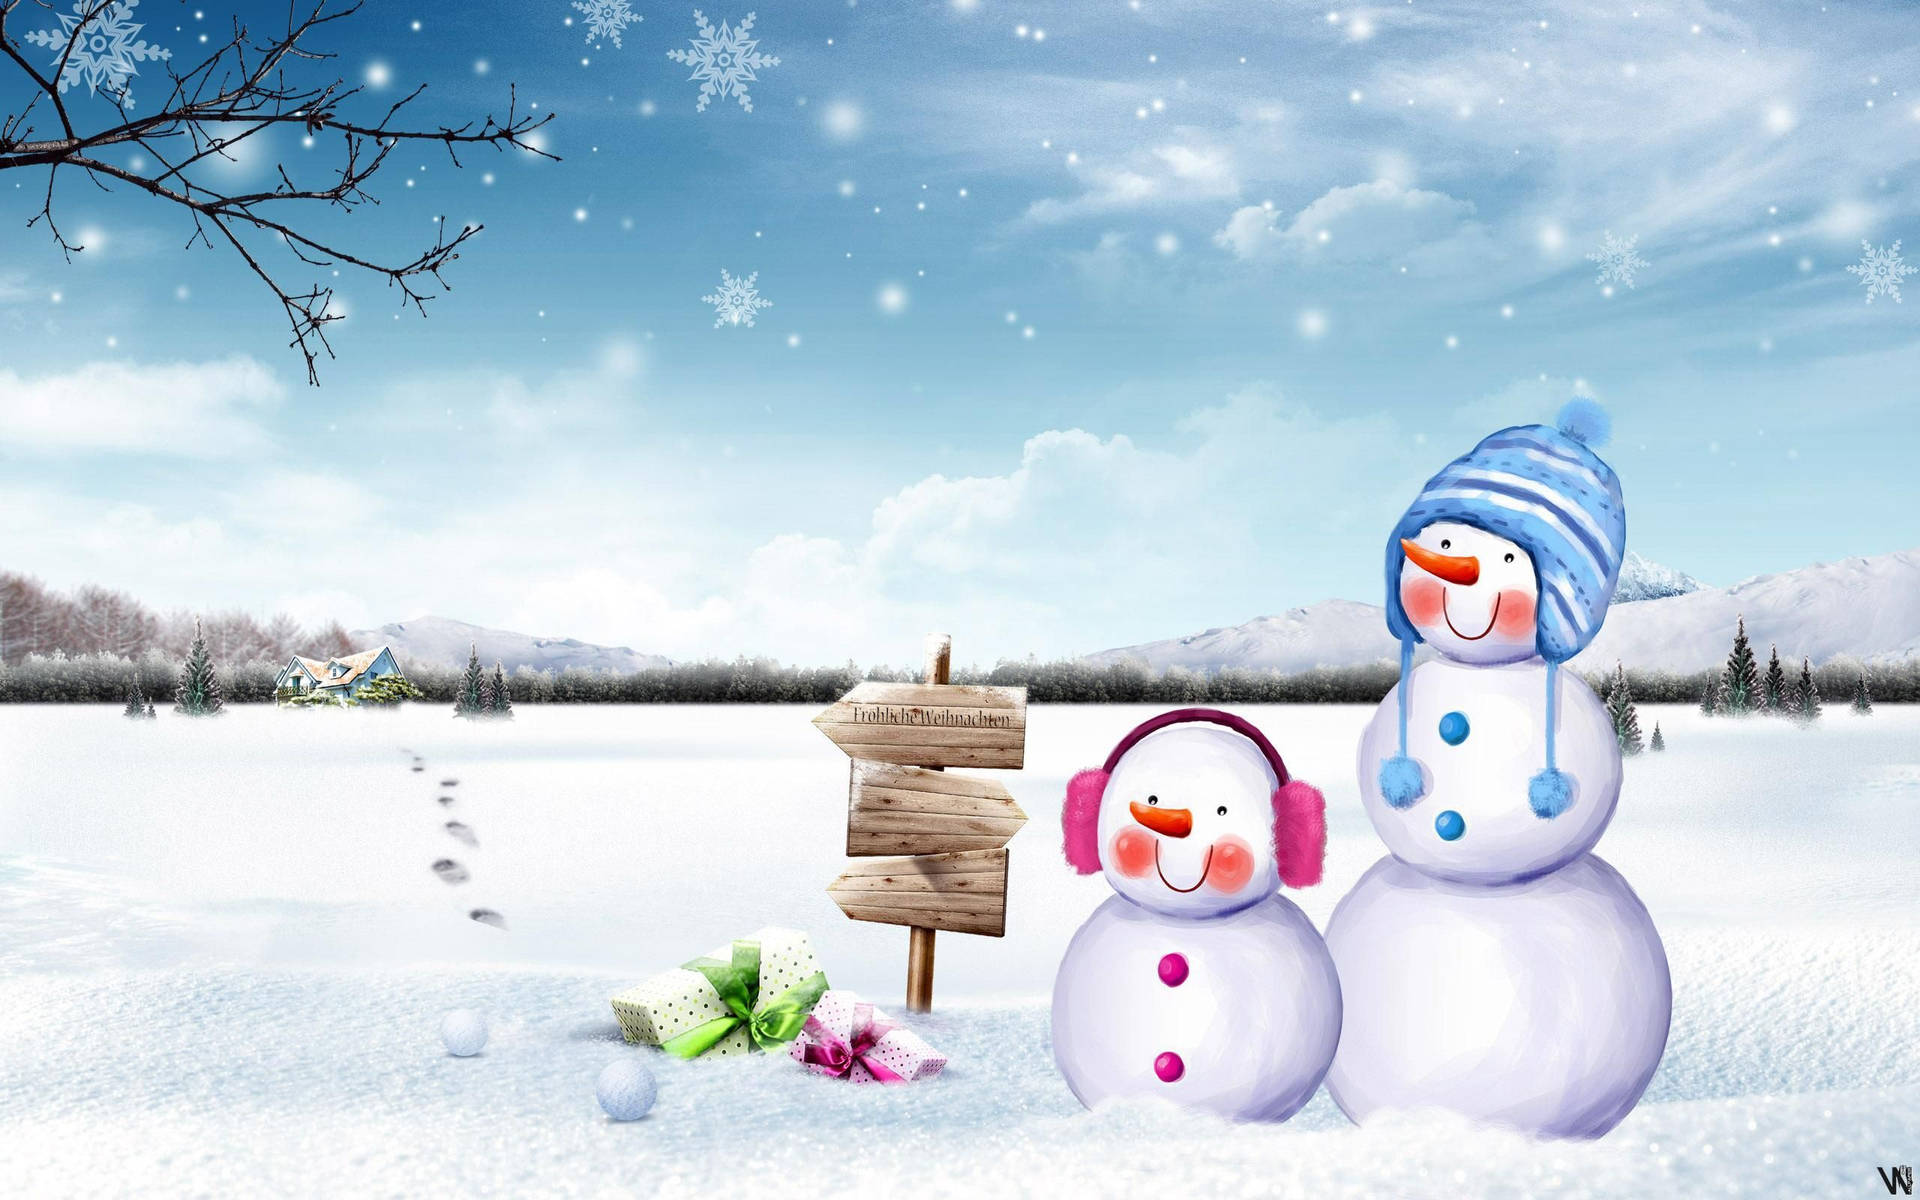 A Snowy Greeting Wallpaper